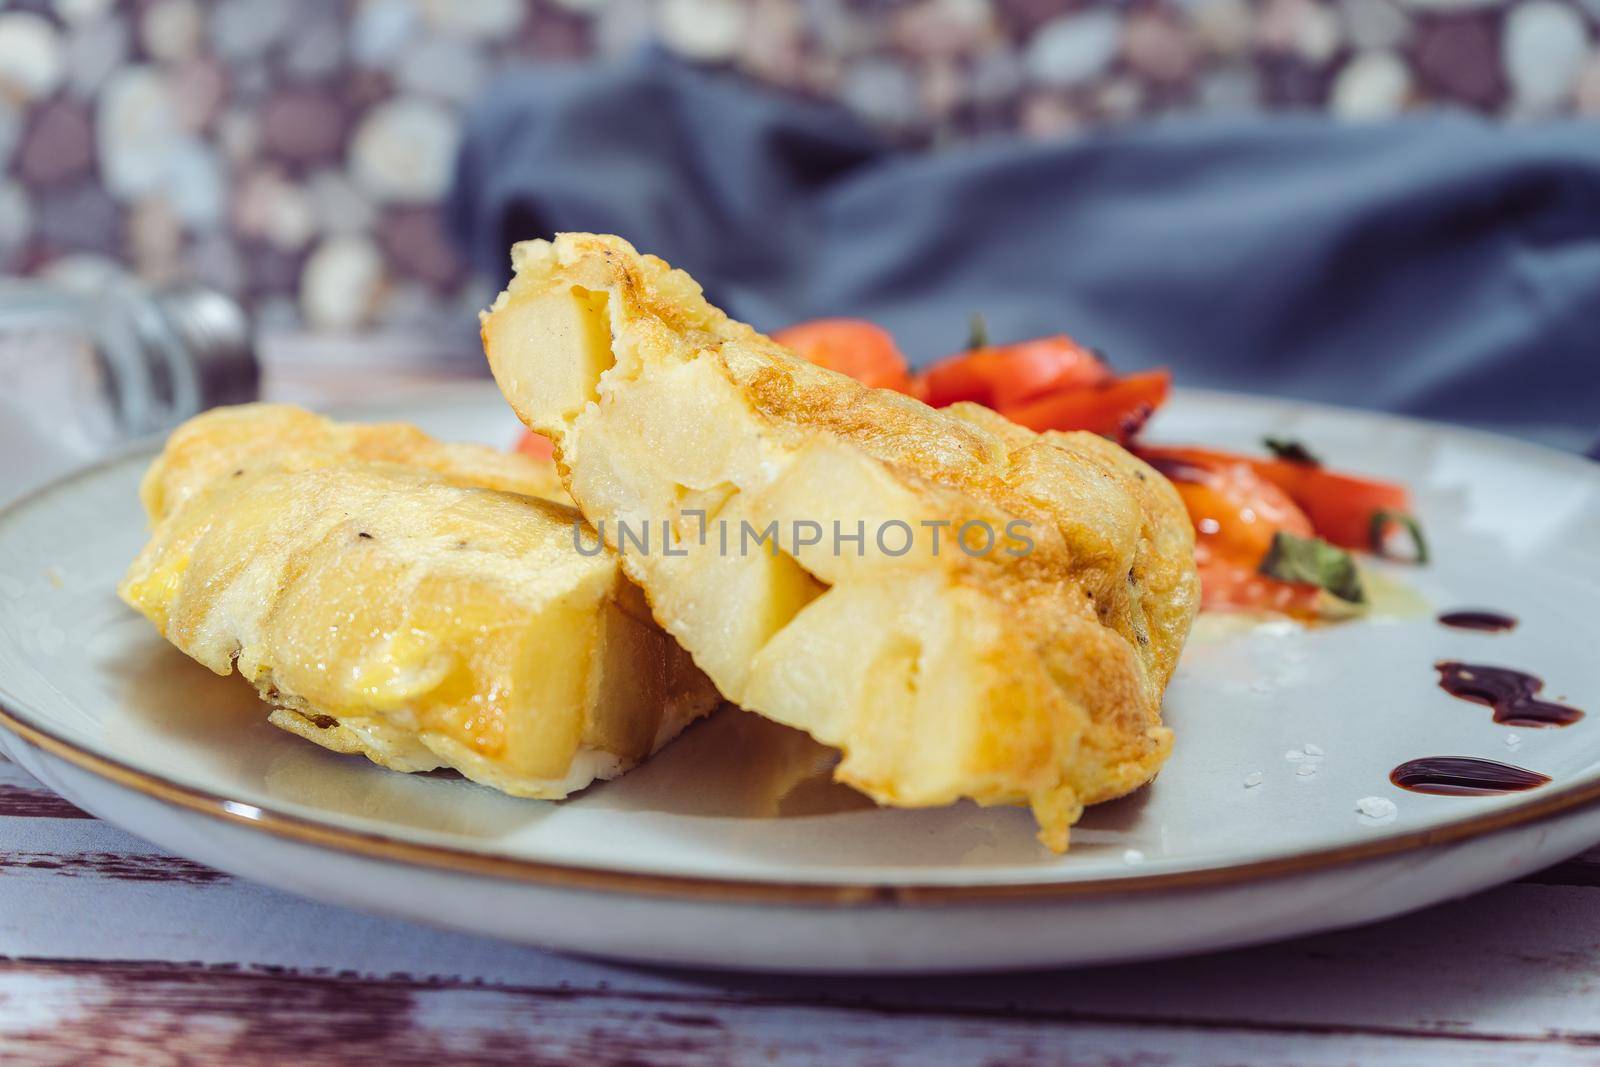 Normal view of a plate with two portions of Spanish potato omelette and sliced tomatoes with olive and sherry vinegar on a wooden rustic table.